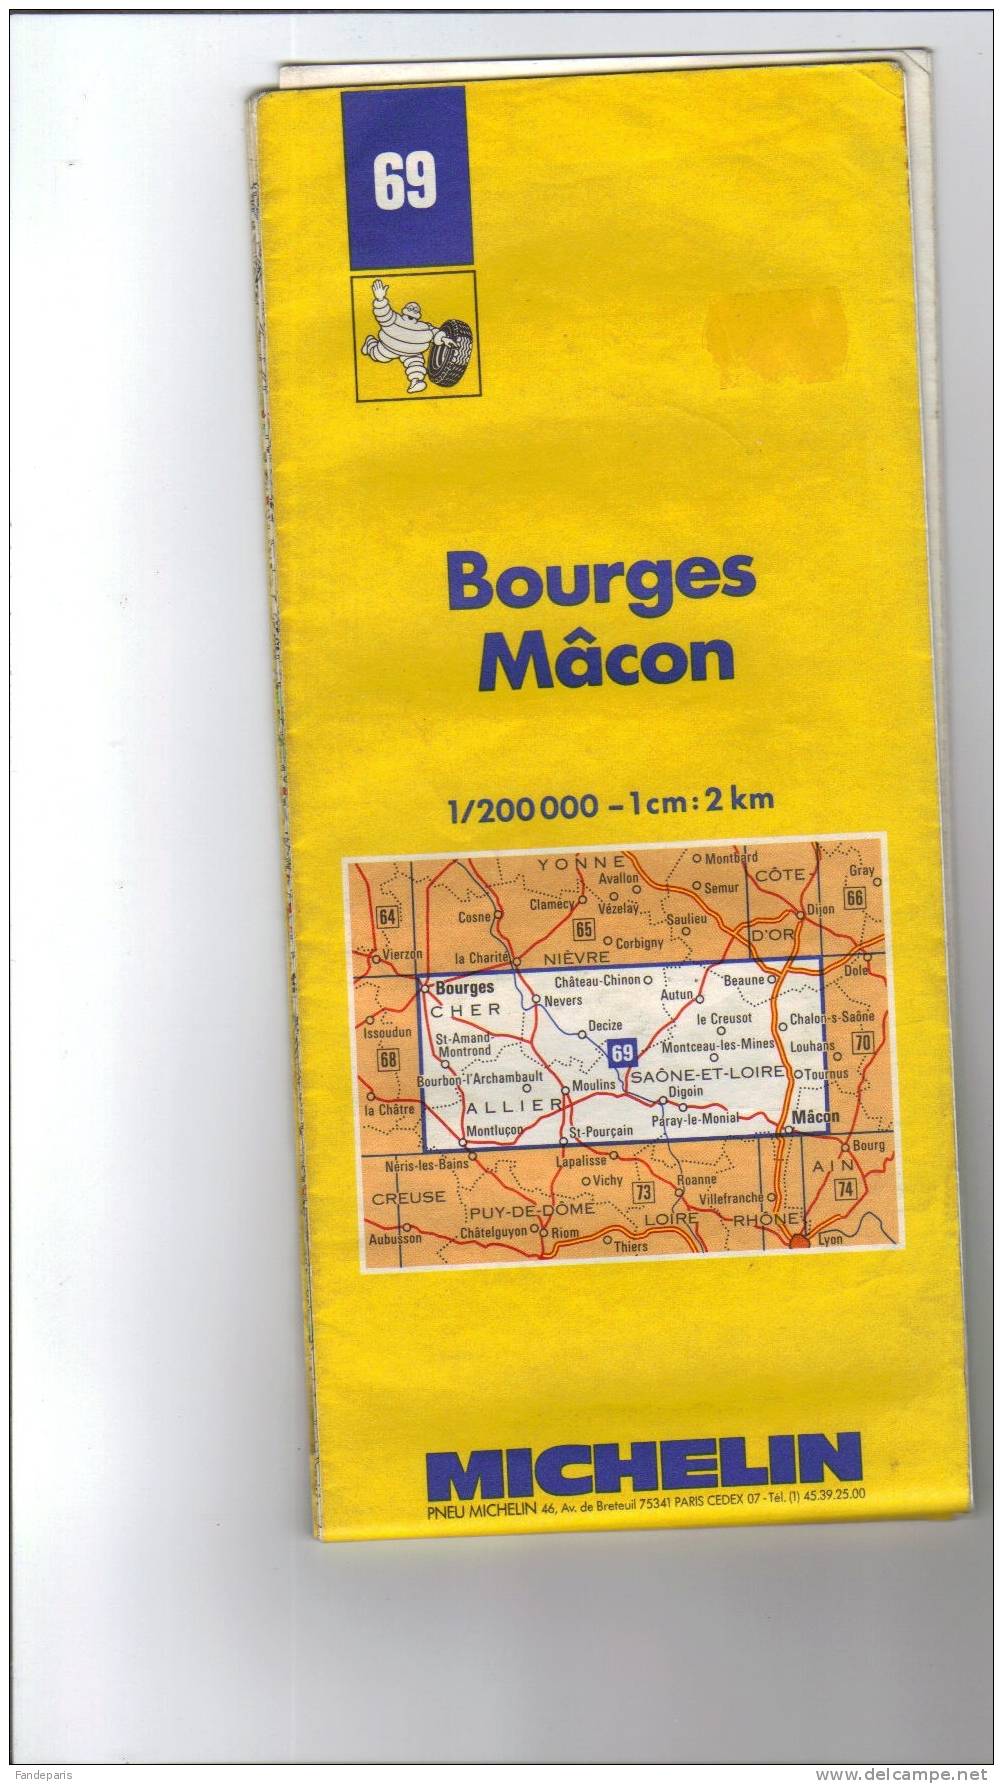 CARTES ROUTIERES  // FRANCE  //   BOURGES - MACON  / MICHELIN  / N° 69 - Roadmaps